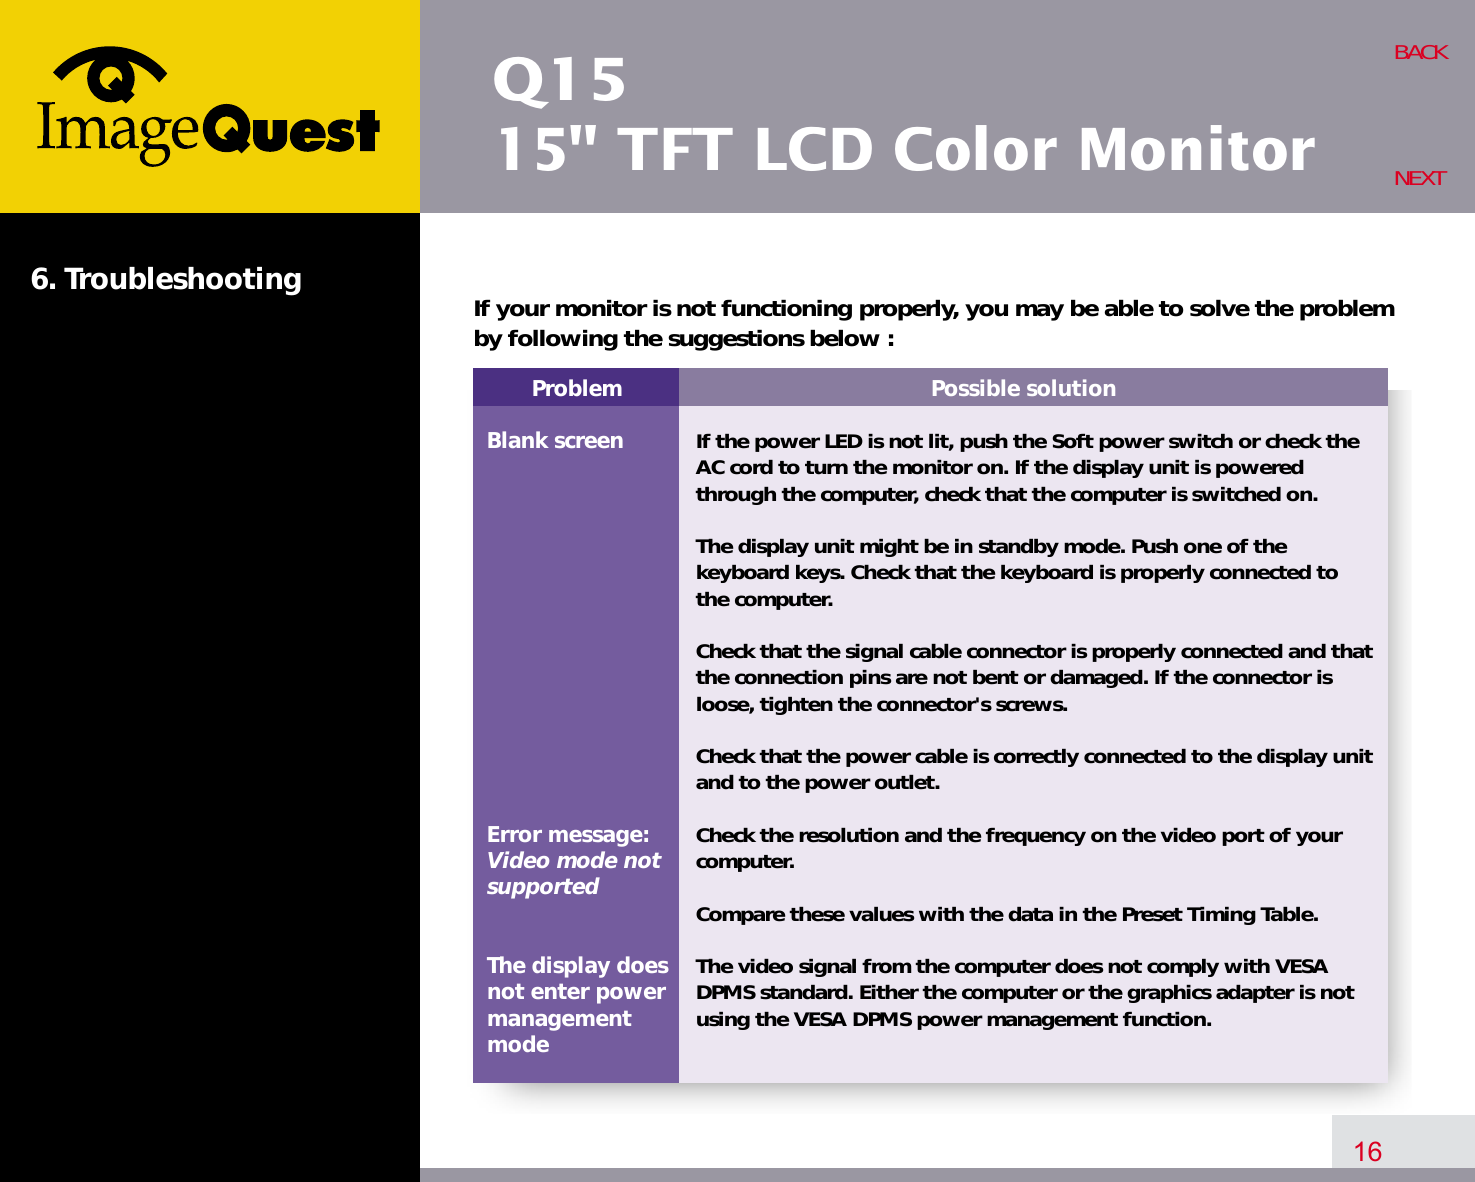 Q1515&quot; TFT LCD Color Monitor6. Troubleshooting16BACKNEXTProblemBlank screenError message:Video mode notsupportedThe display does not enter power managementmodePossible solutionIf the power LED is not lit, push the Soft power switch or check theAC cord to turn the monitor on. If the display unit is poweredthrough the computer, check that the computer is switched on.The display unit might be in standby mode. Push one of thekeyboard keys. Check that the keyboard is properly connected tothe computer.Check that the signal cable connector is properly connected and thatthe connection pins are not bent or damaged. If the connector isloose, tighten the connector&apos;s screws.Check that the power cable is correctly connected to the display unitand to the power outlet. Check the resolution and the frequency on the video port of yourcomputer.Compare these values with the data in the Preset Timing Table.The video signal from the computer does not comply with VESADPMS standard. Either the computer or the graphics adapter is notusing the VESA DPMS power management function.If your monitor is not functioning properly, you may be able to solve the problemby following the suggestions below :